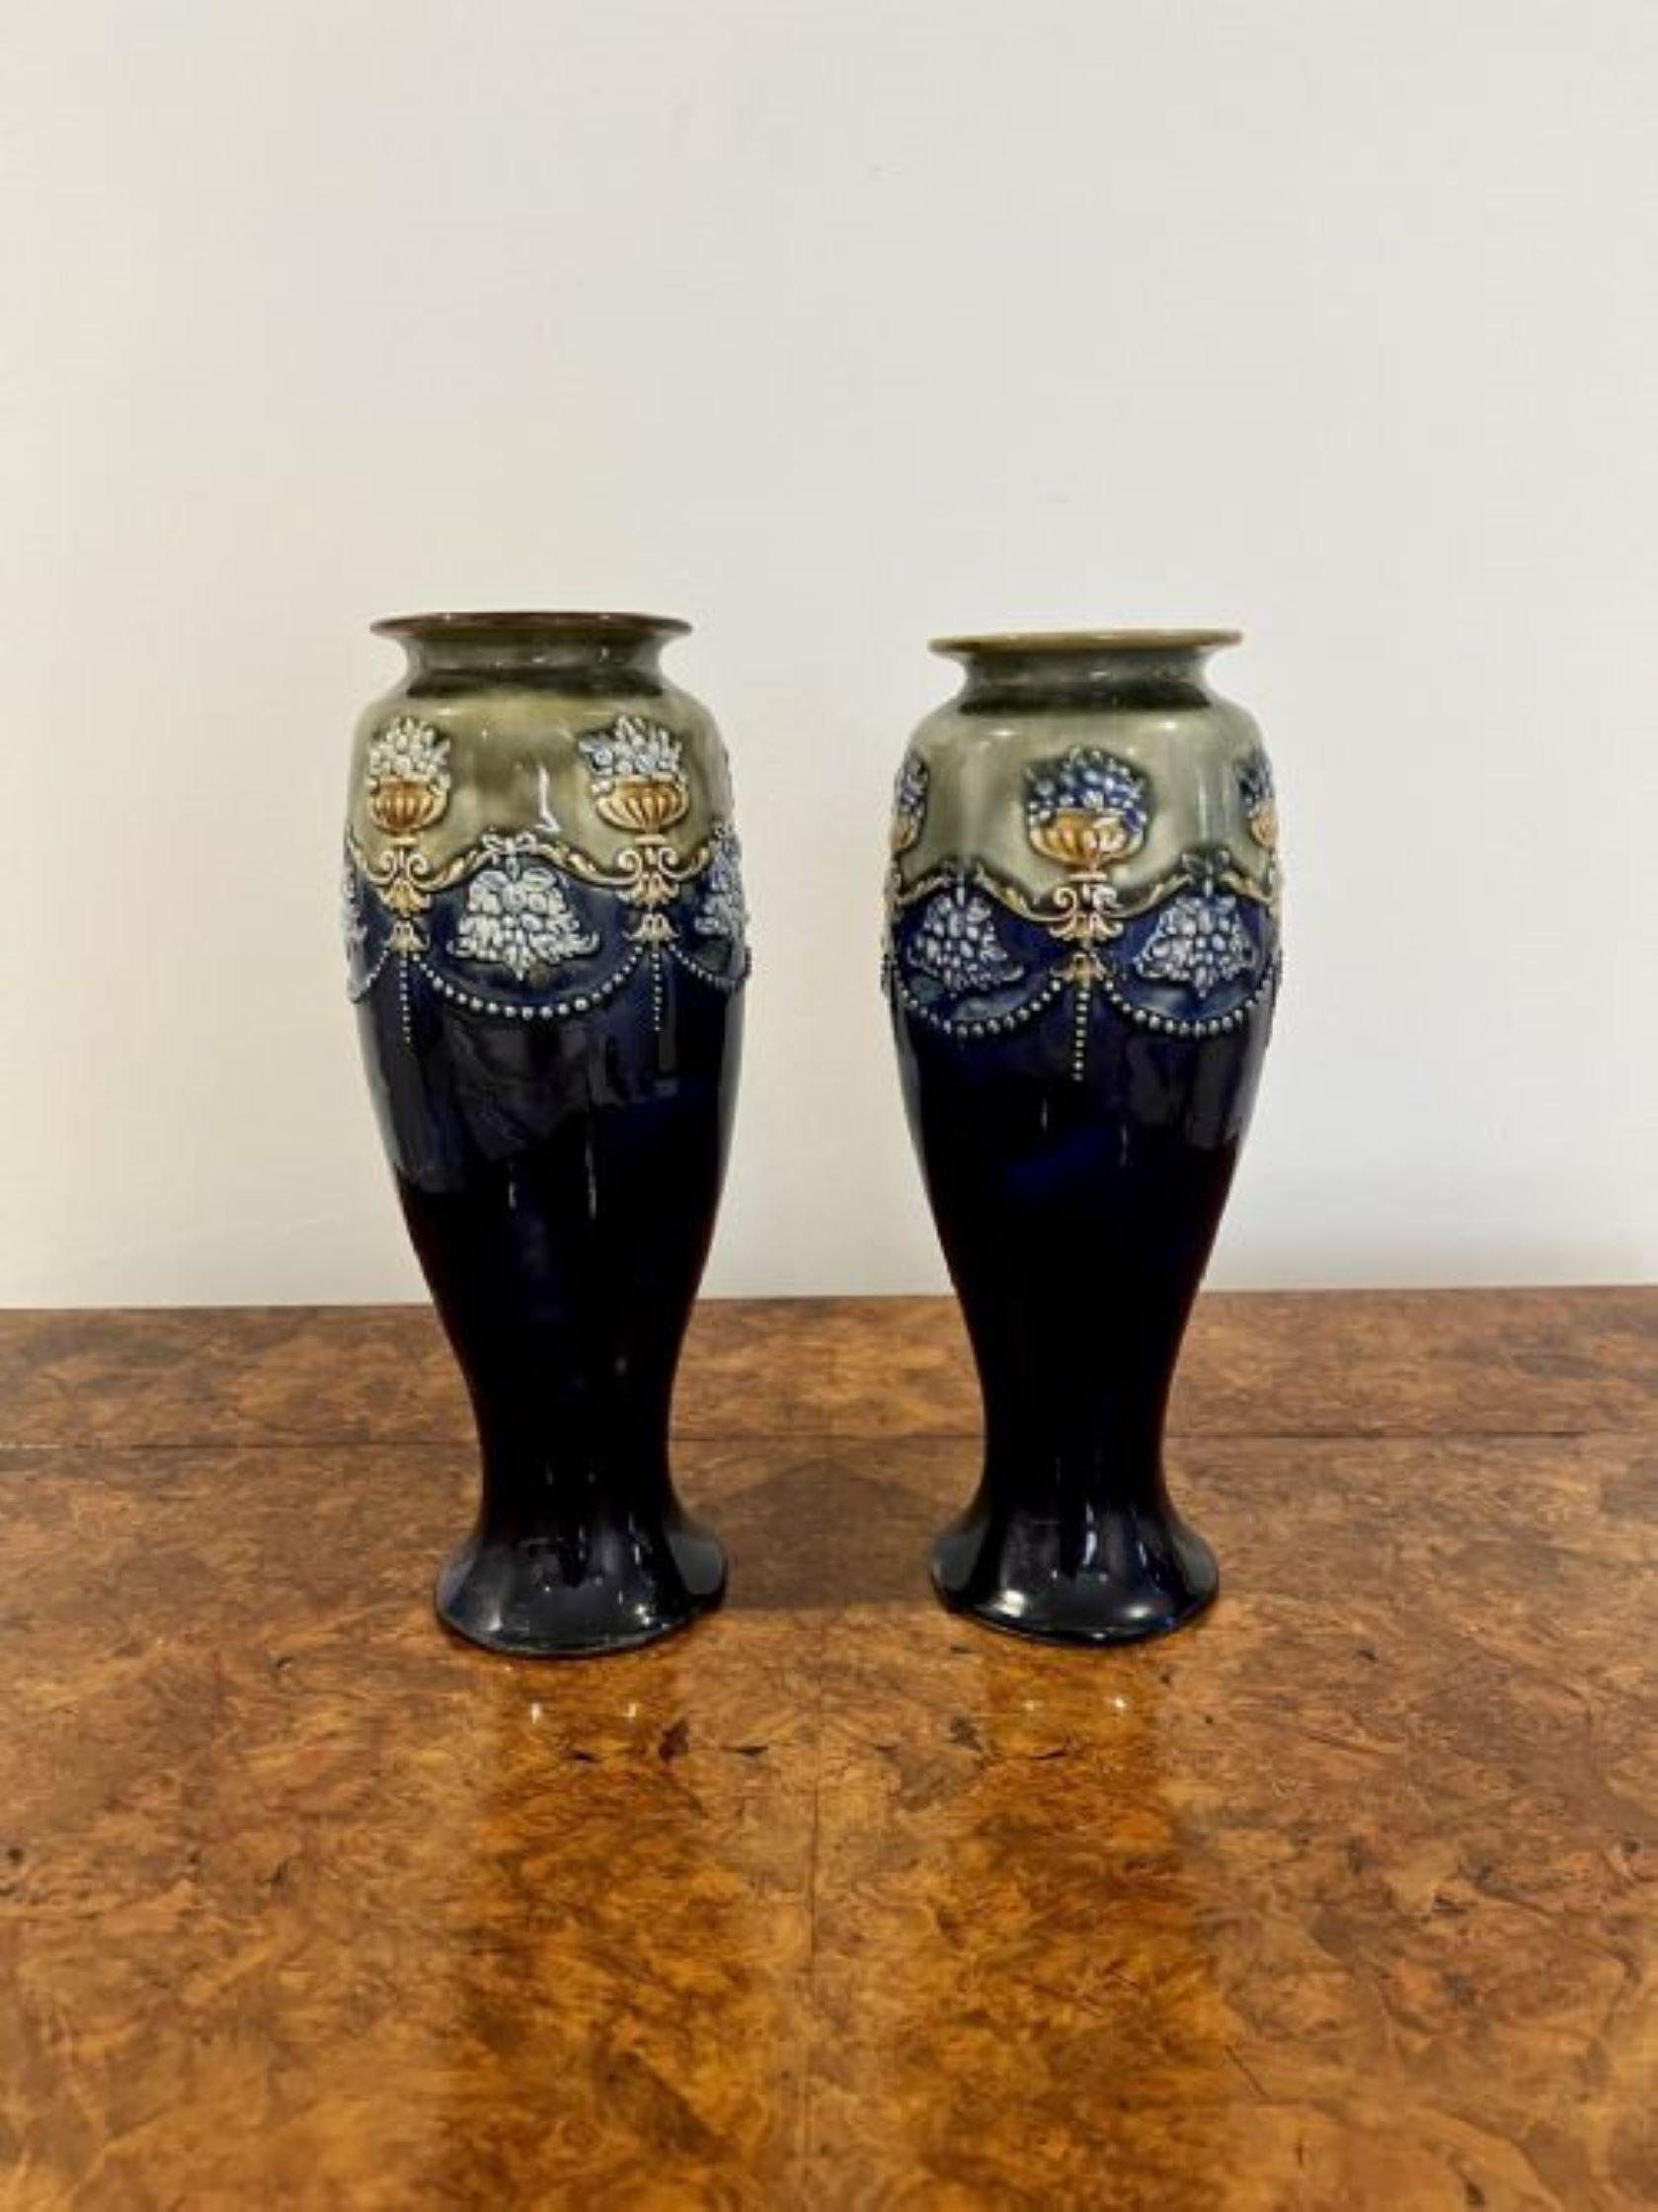 quality pair of antique Victorian Royal Doulton vases, having a quality pair of salt-glazed stoneware vases in wonderful blue and green glaze with raised swags, both with impressed marks to the base as shown 